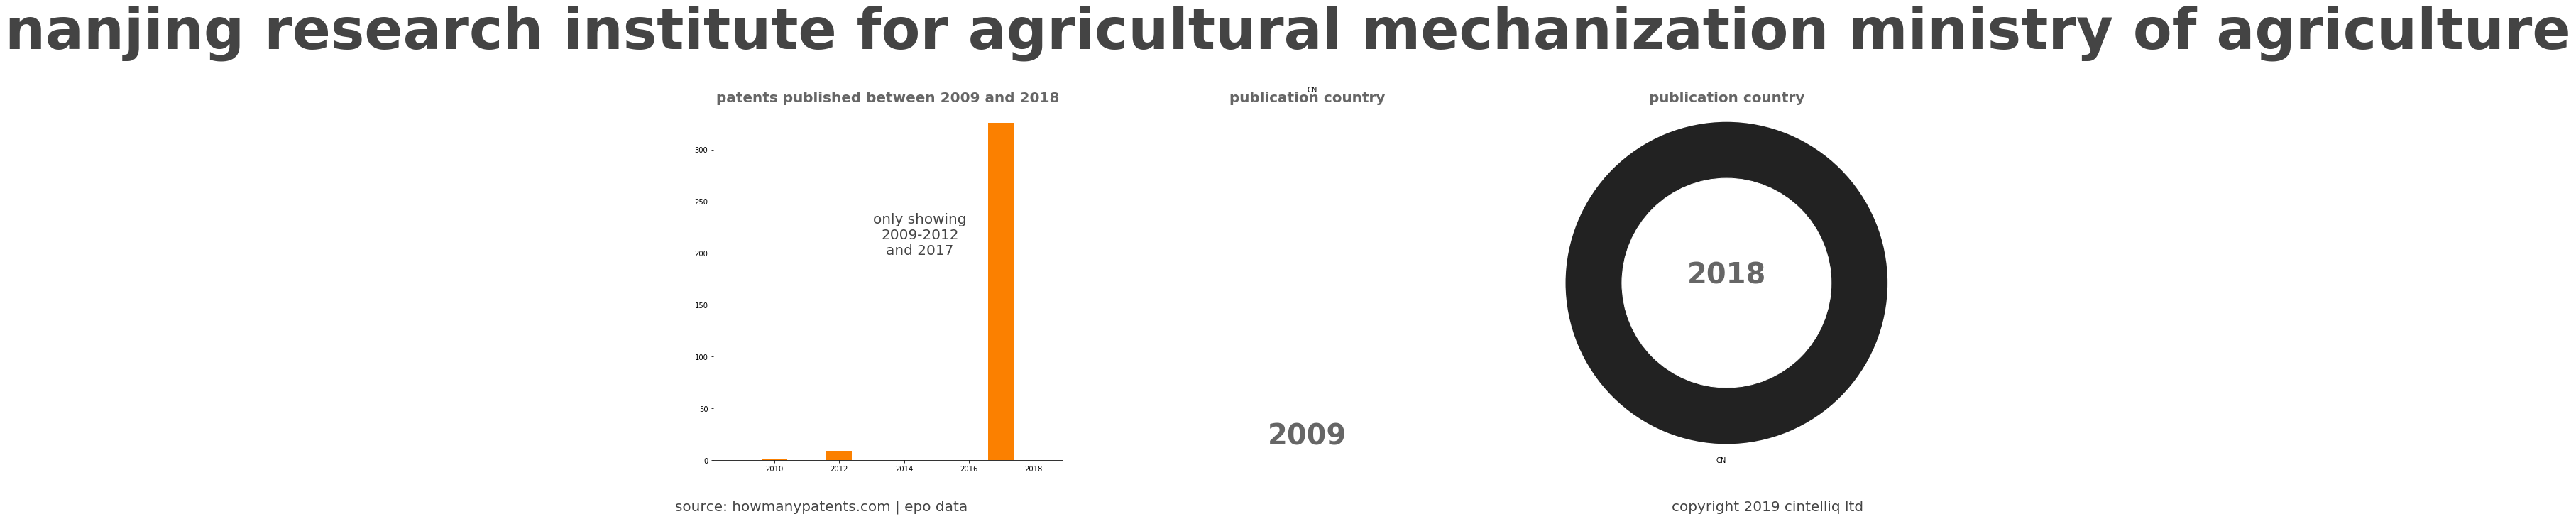 summary of patents for Nanjing Research Institute For Agricultural Mechanization Ministry Of Agriculture